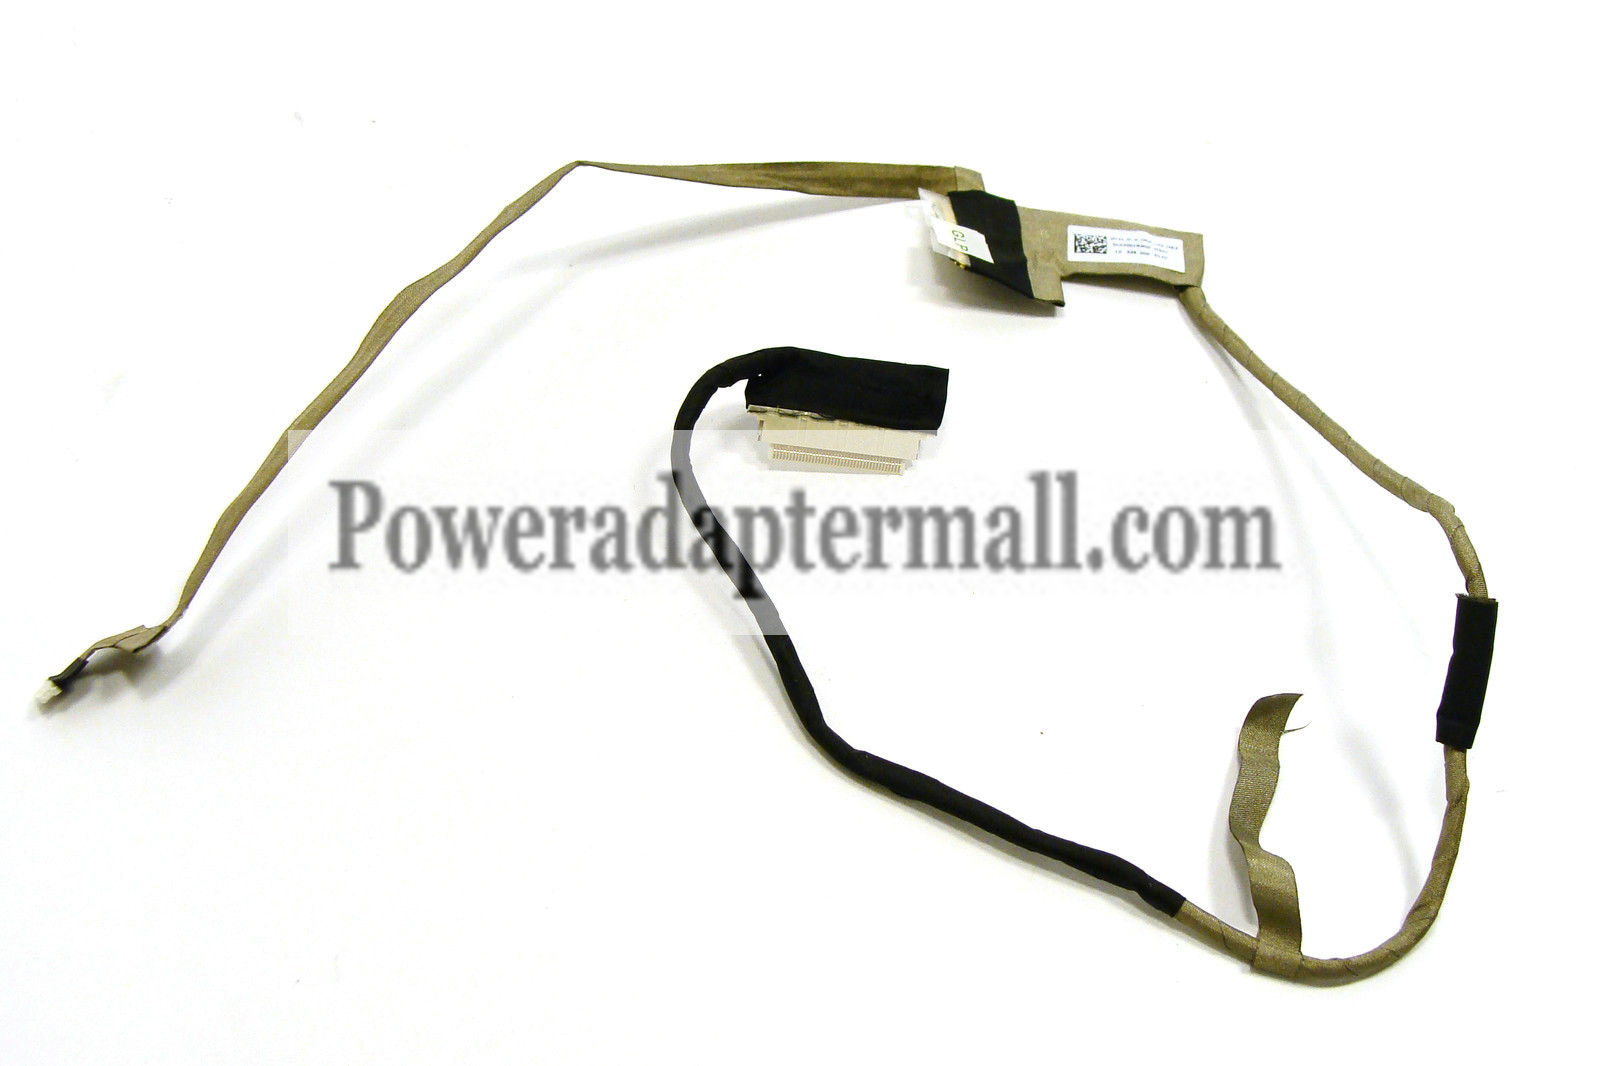 Toshiba Satellite P855 P850 series LCD Video Cable DC02001MM00